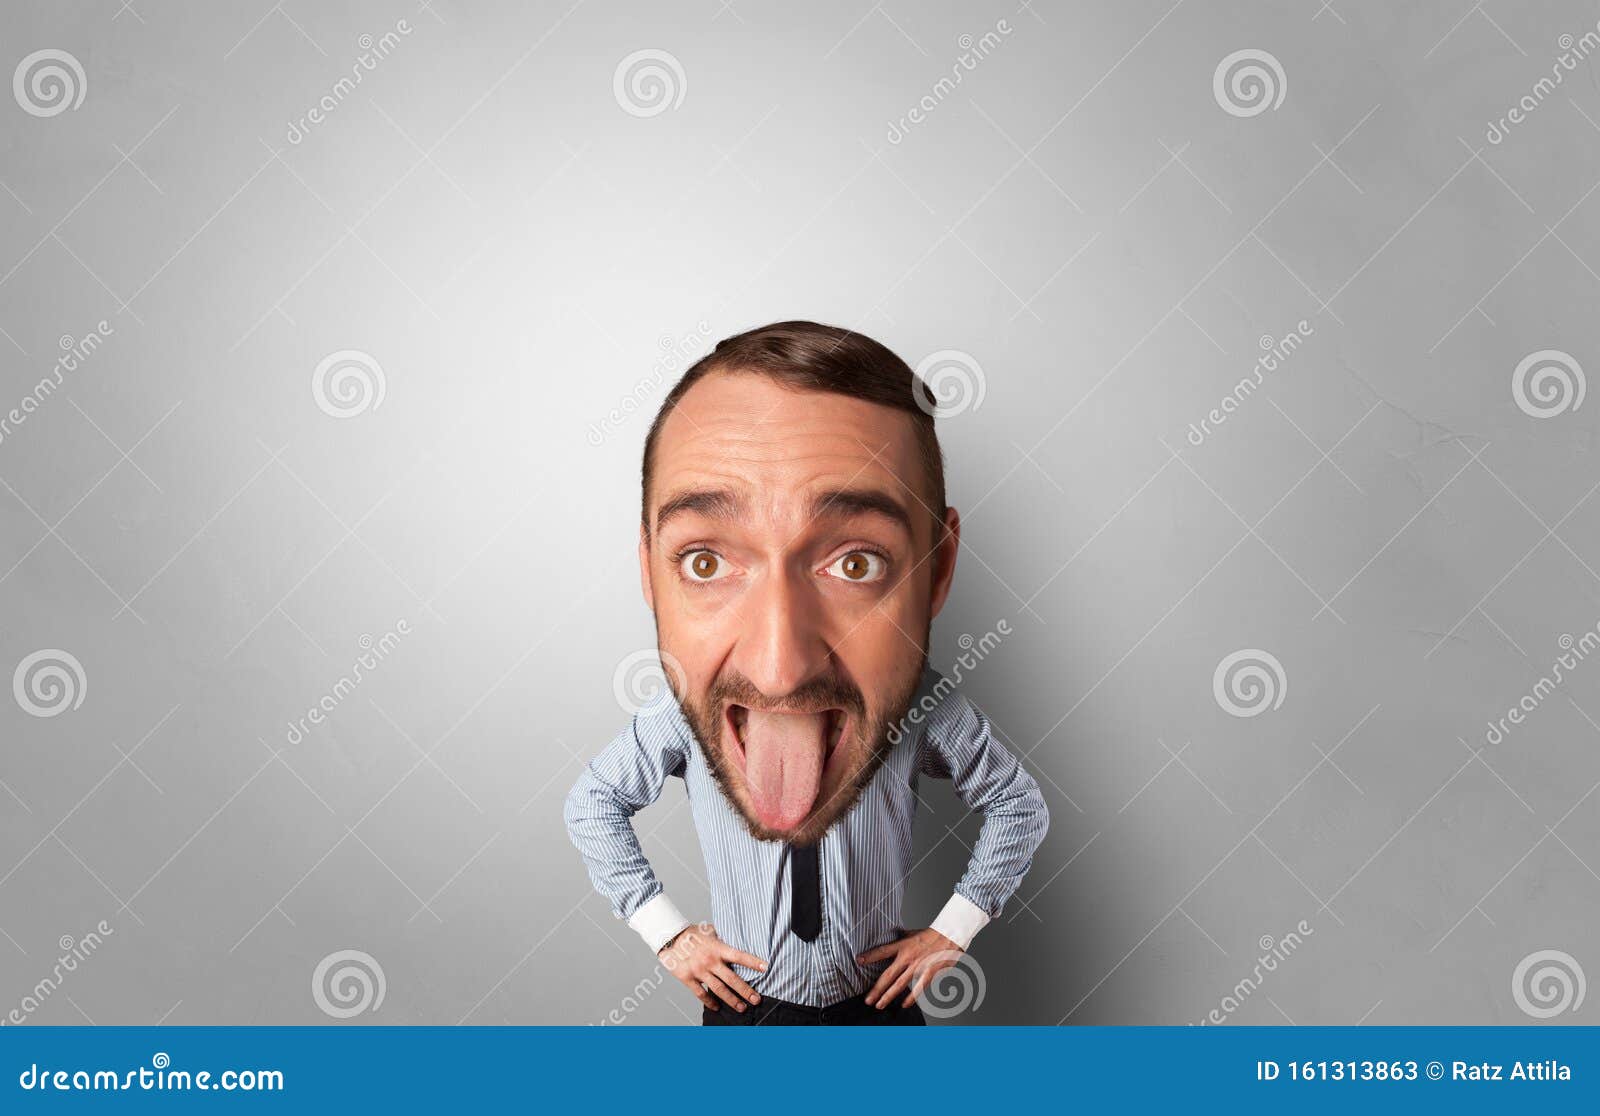 Funny person with big head stock image. Image of chat - 161313863